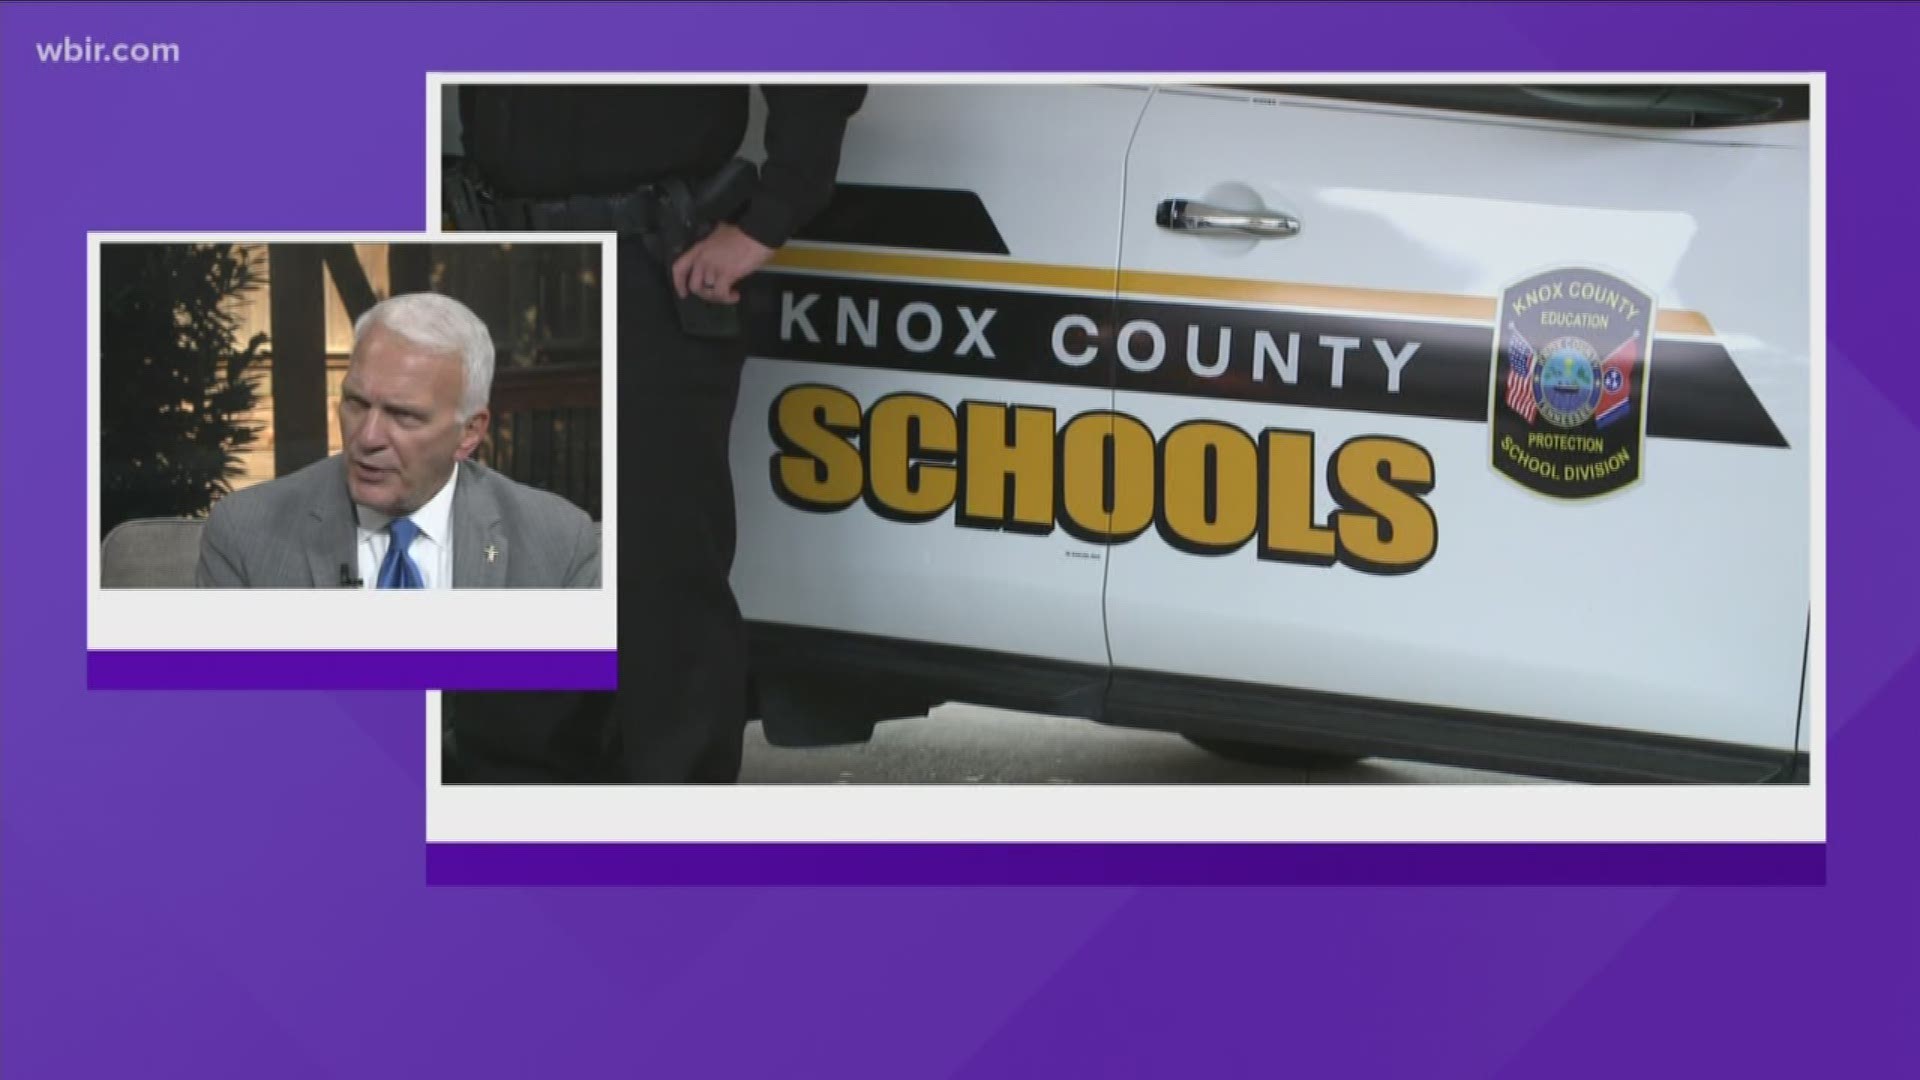 Monday was the first day of school for Knox County students.